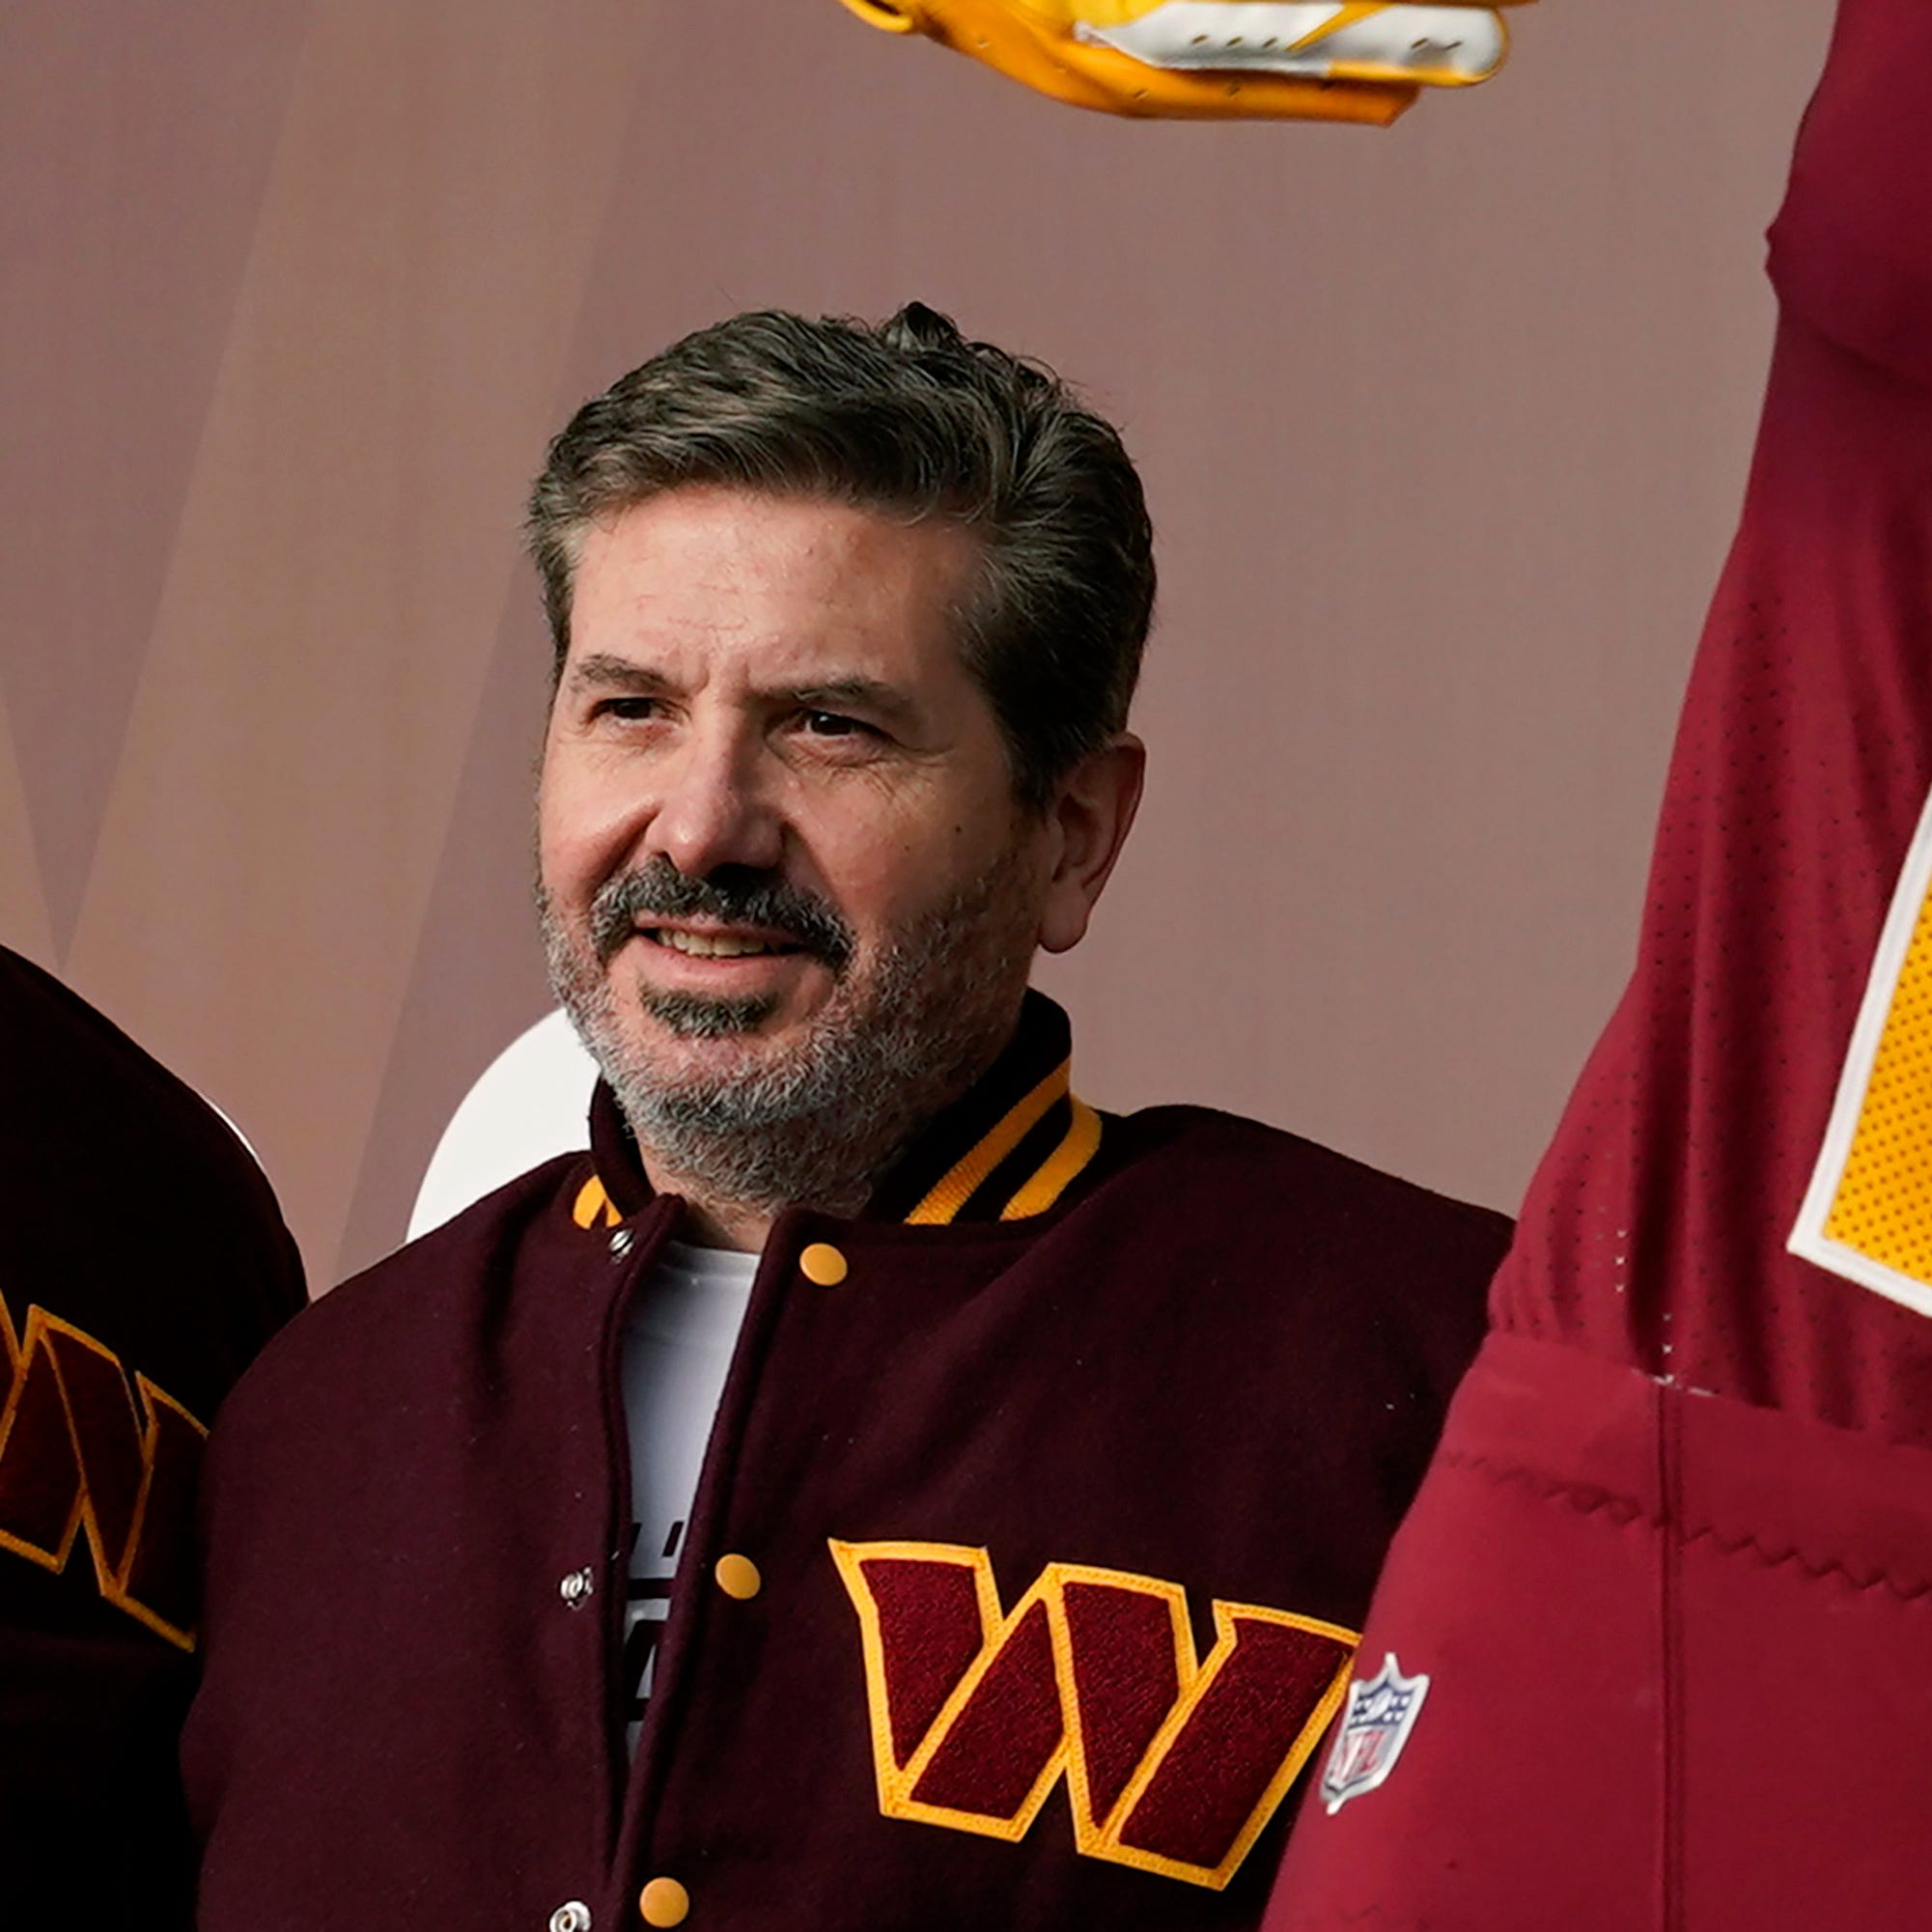 Washington Commanders' Dan Snyder poses for photos during an event to unveil the NFL football team's new identity, Feb. 2, 2022, in Landover, Md.